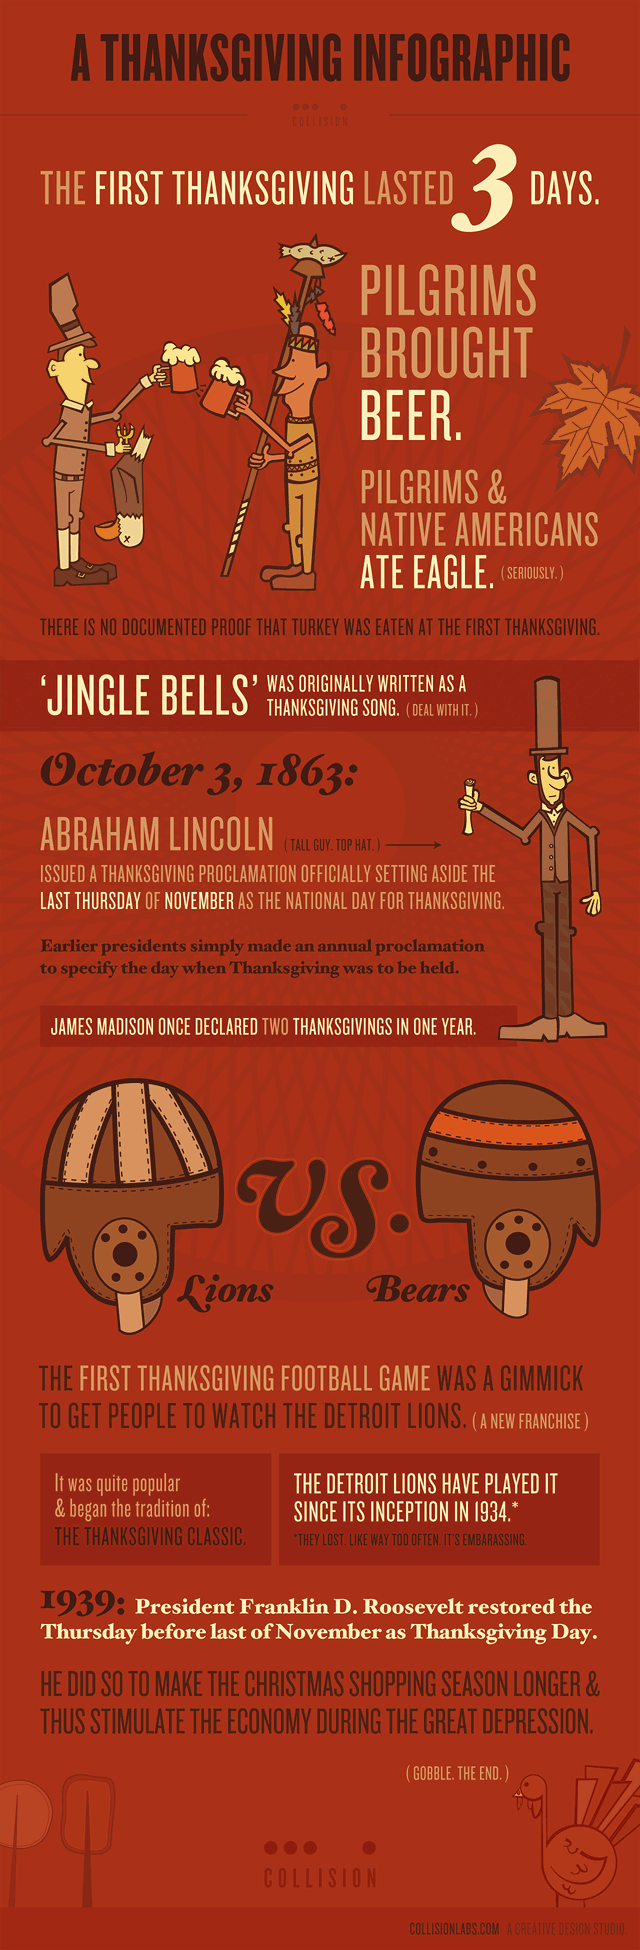 CollisionLabs_Thanksgiving_Infographic